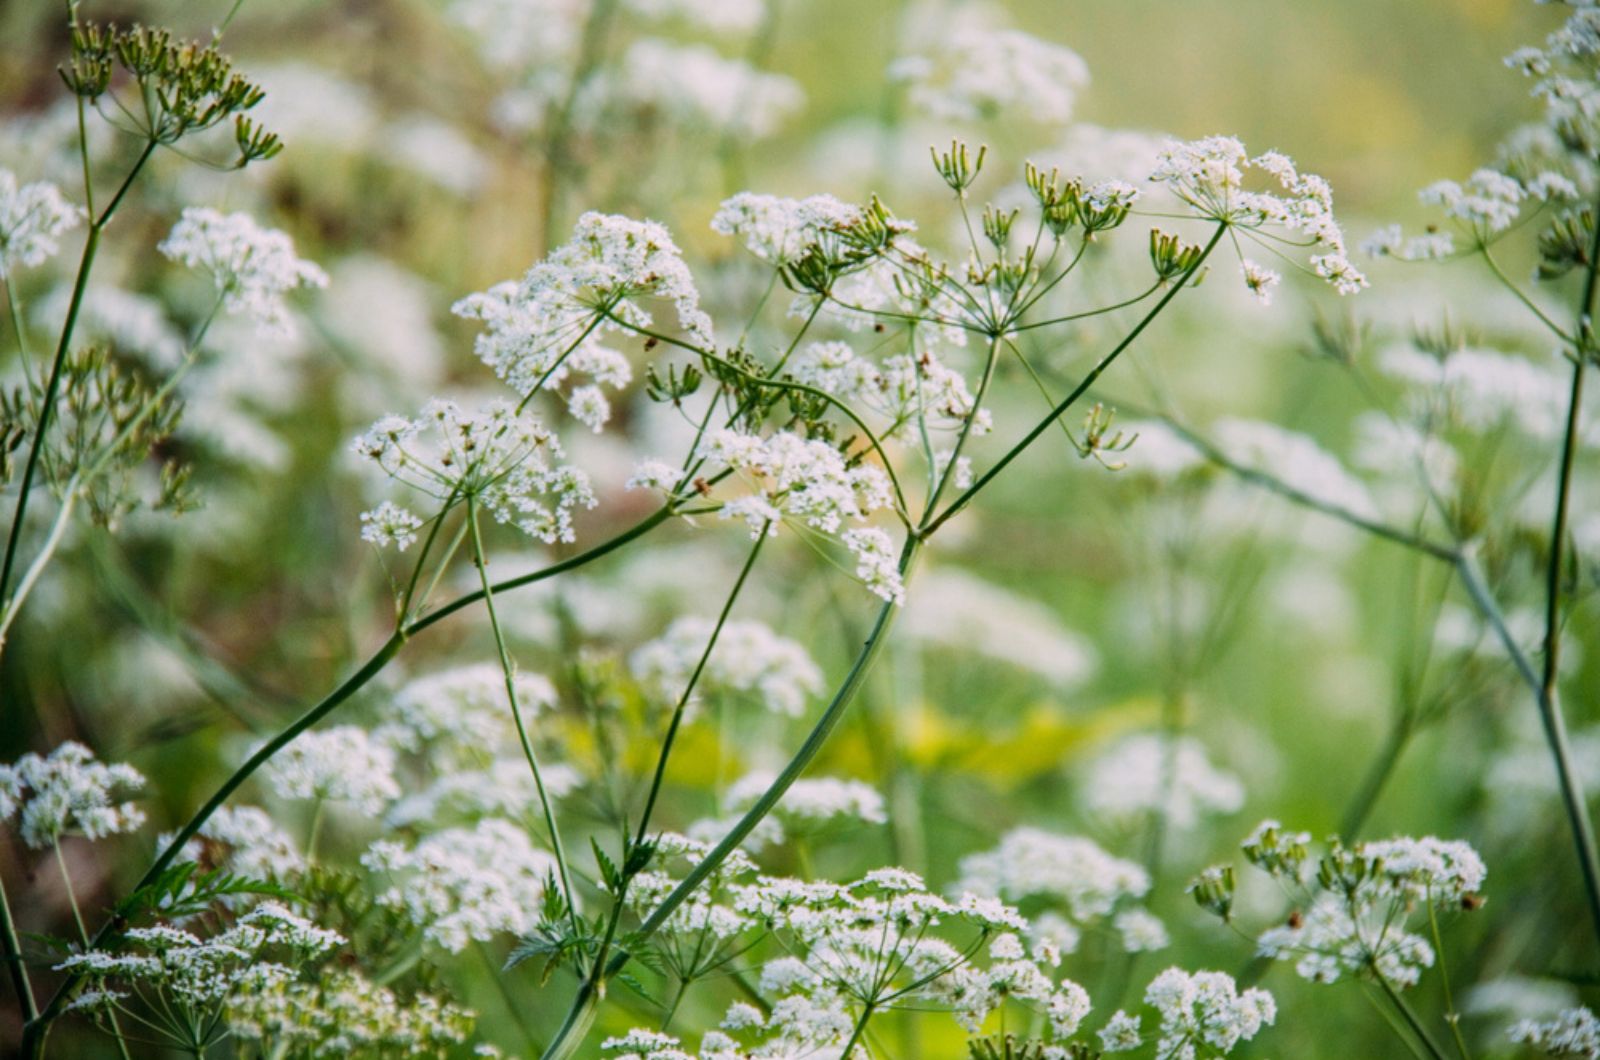 This Good Looking White Wildflower Will Be A Favorite Guest In Your Shade Garden